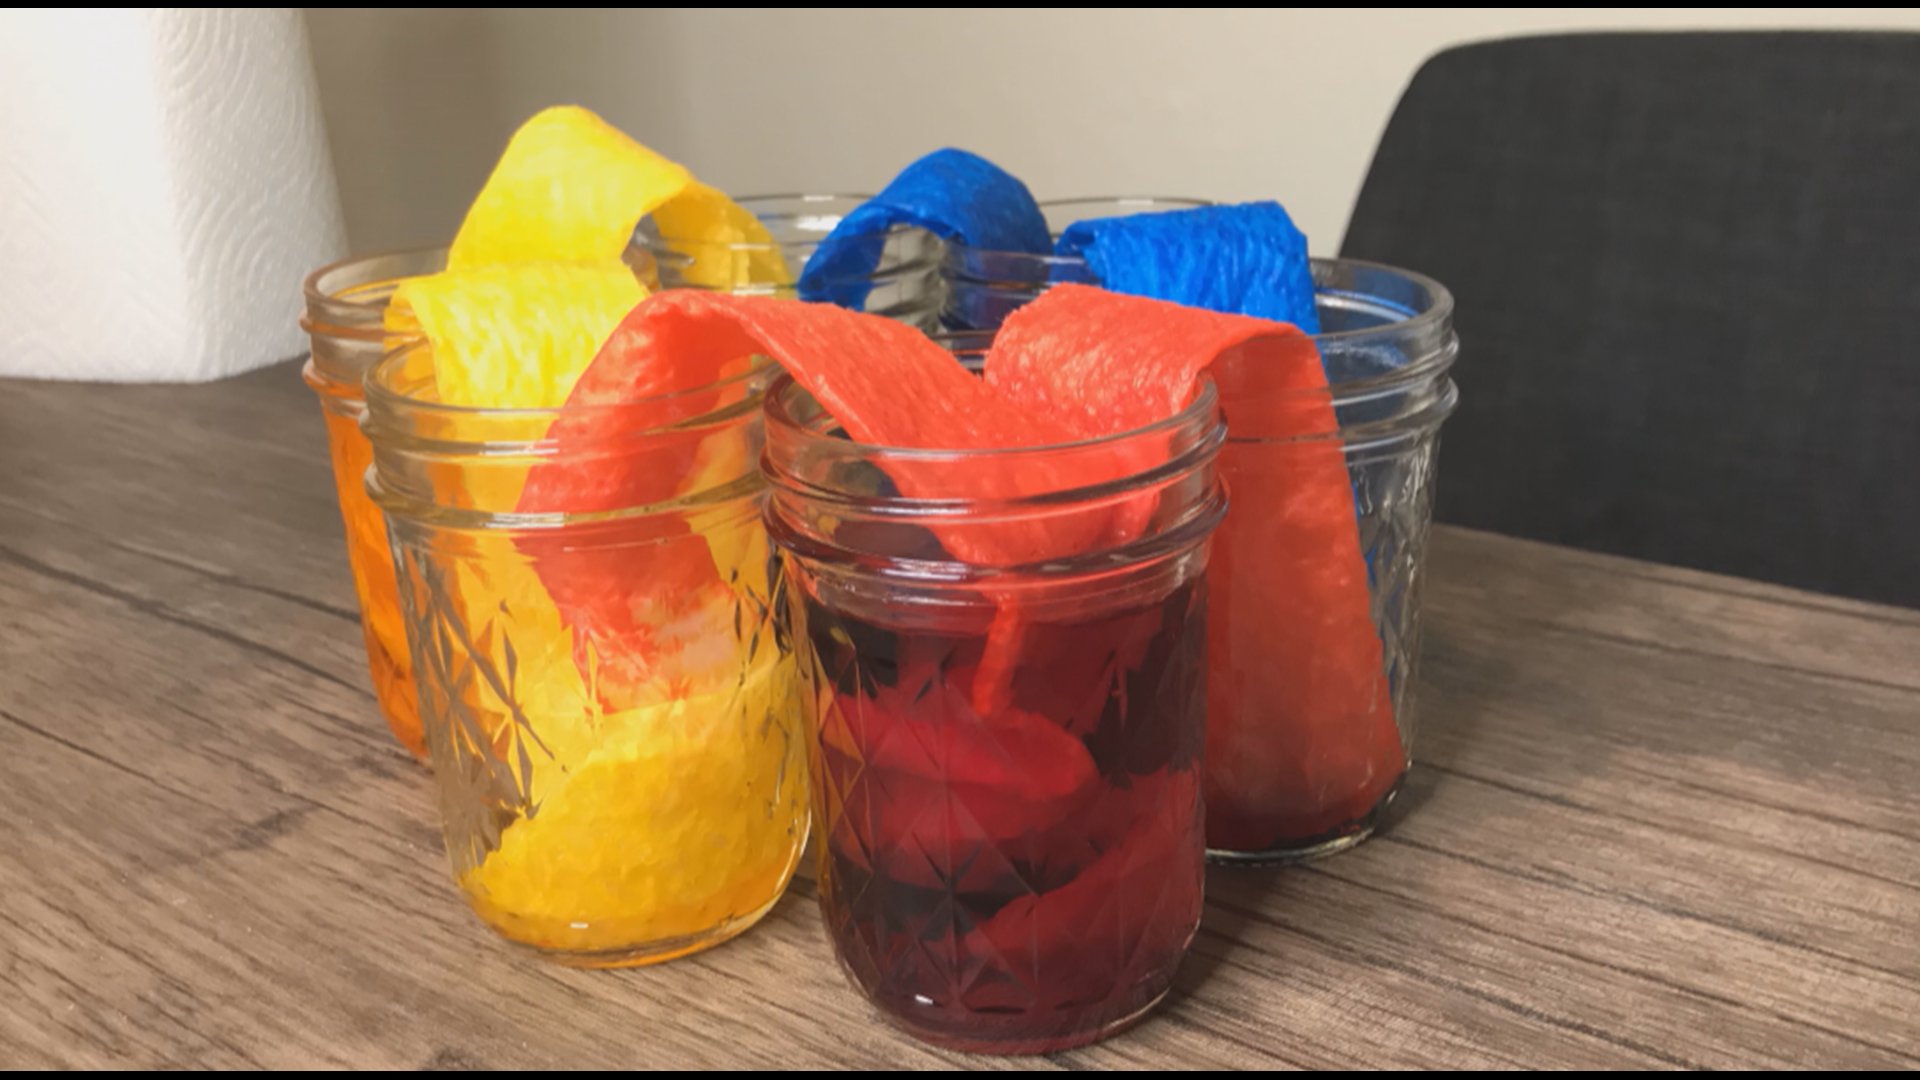 Watch water defy gravity via capillary action in this easy experiment.